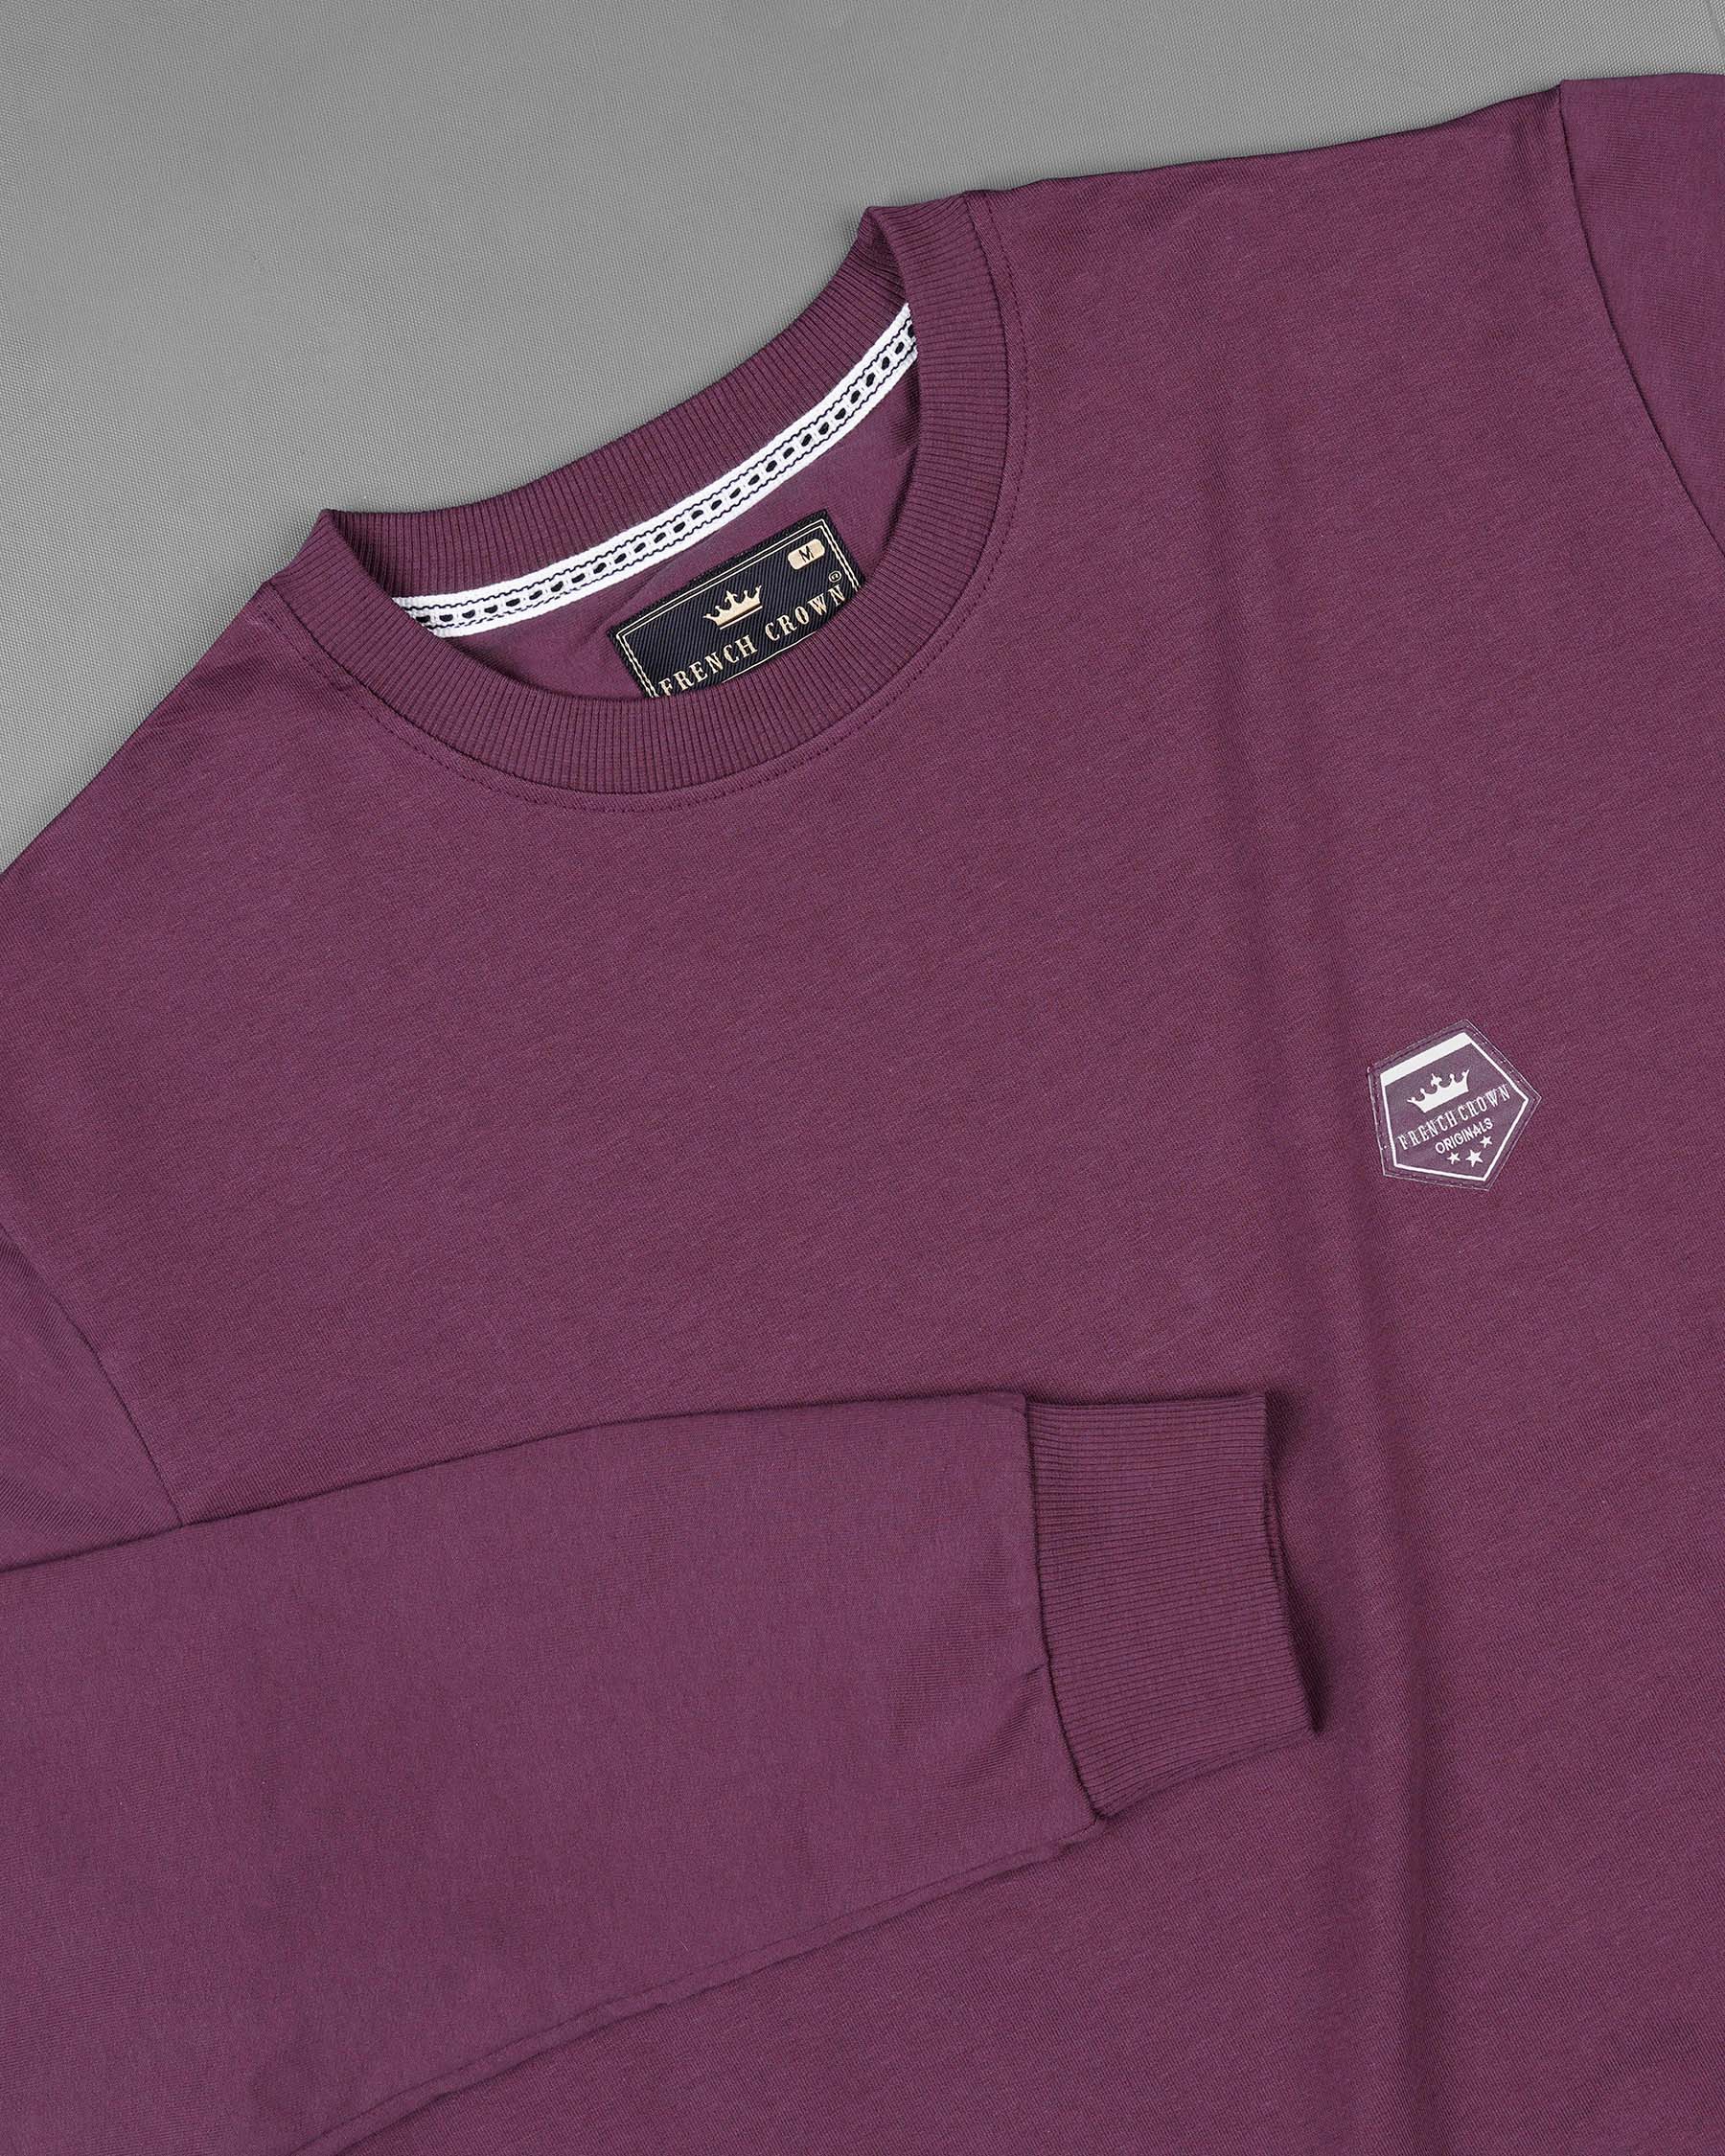 Camelot Wine with Bright White Patch Worked Sweatshirt TS585-S, TS585-M, TS585-L, TS585-XL, TS585-XXL, TS585-3XL, TS585-4XL